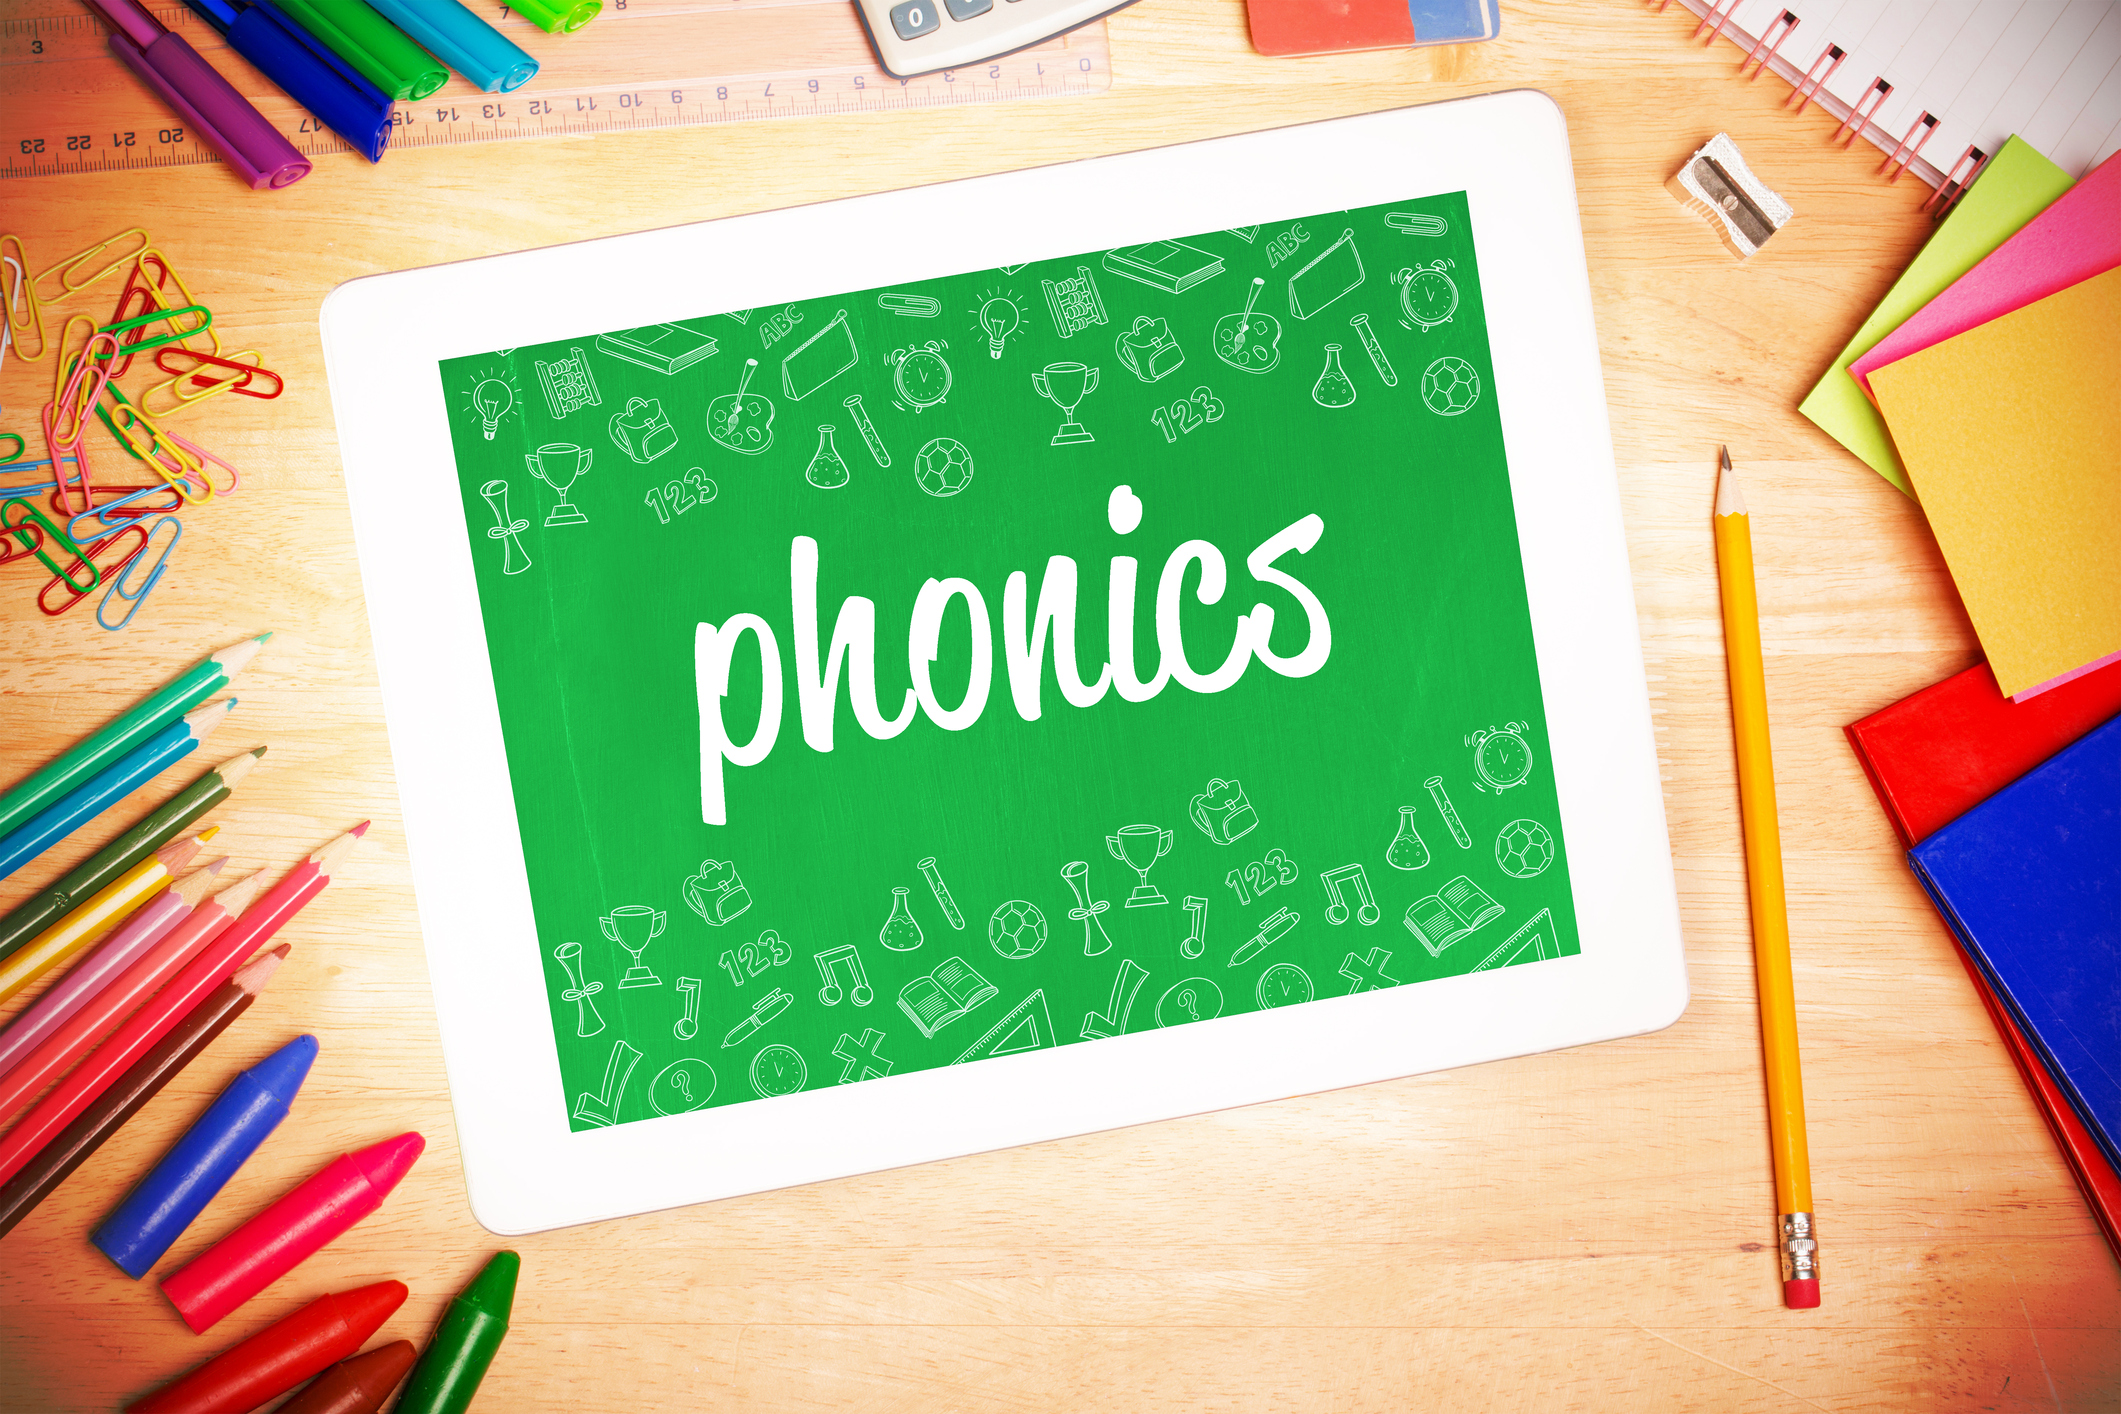 Let's Look At Phonics